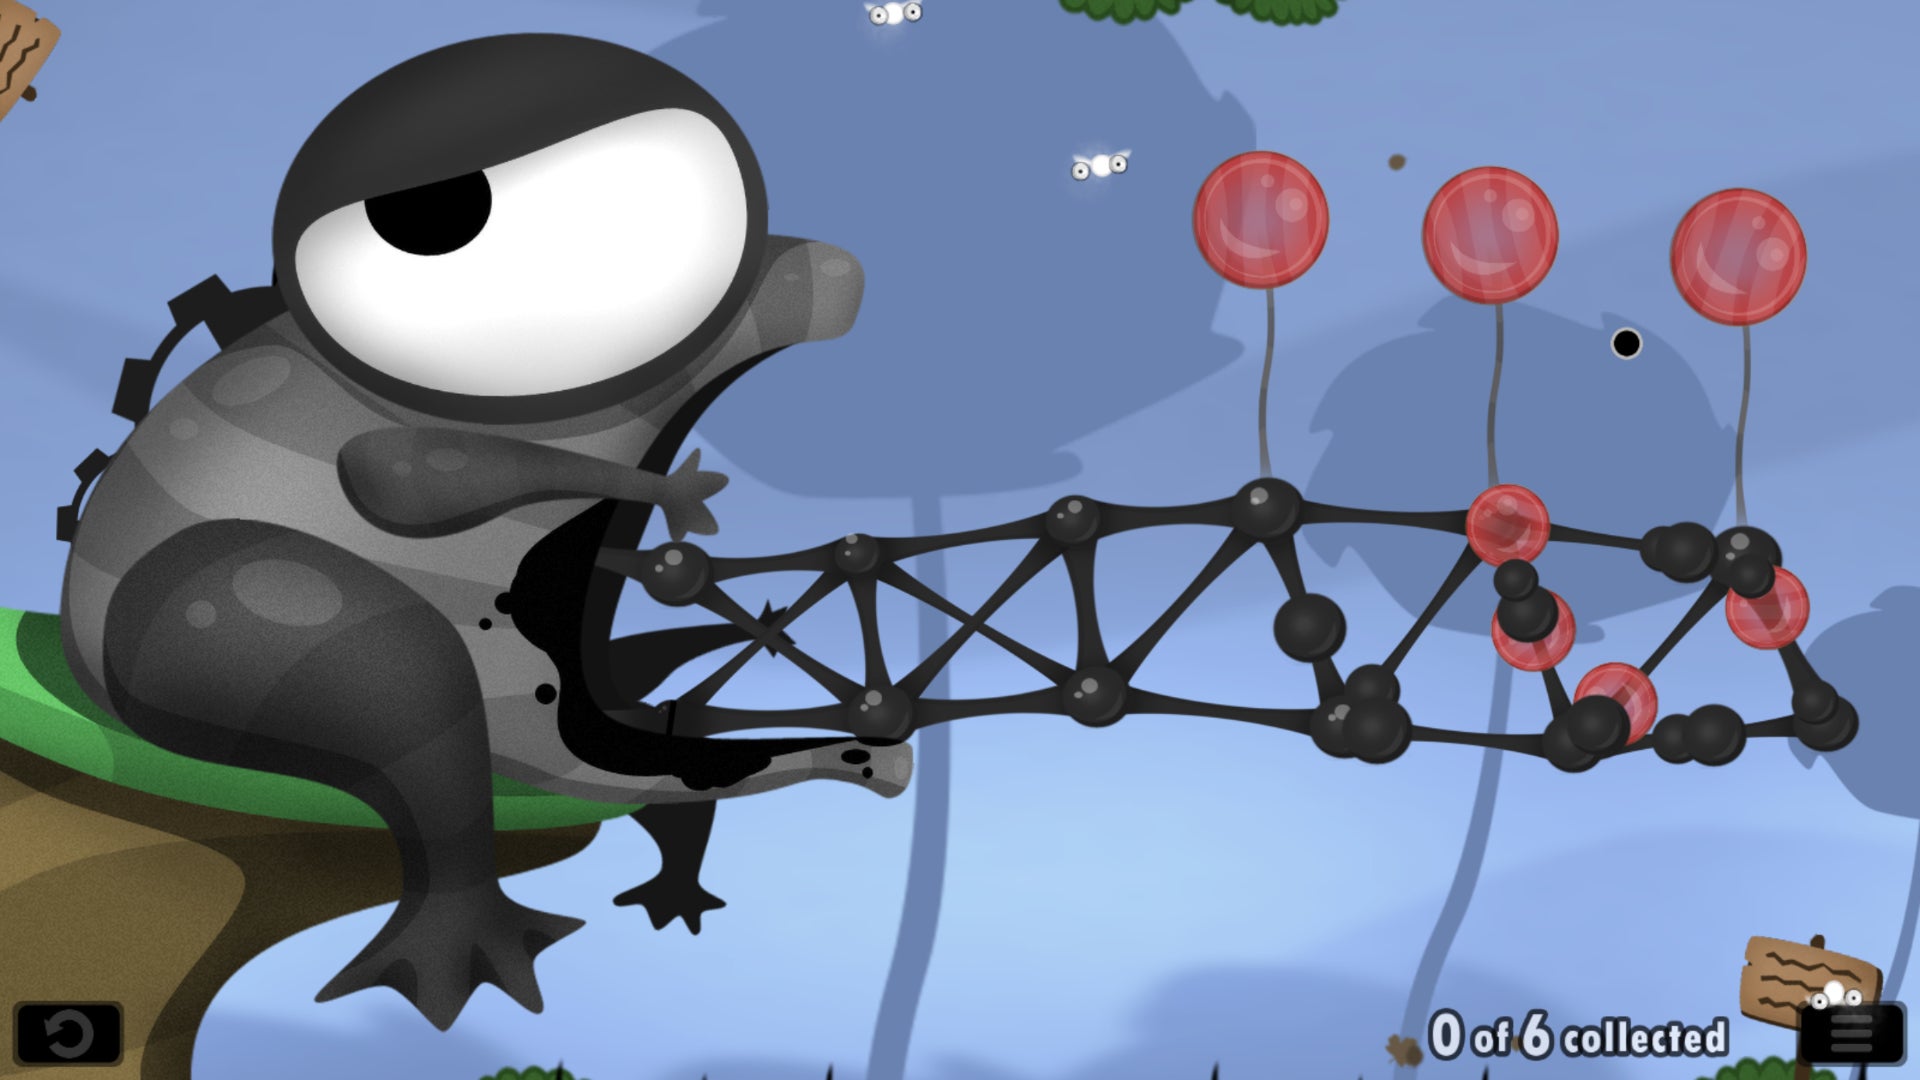 Fisty's Bog is a level in World Of Goo where the player must create a bridge of Goo balls from Fisty's mouth, and keep it aloft using Balloon Goo.